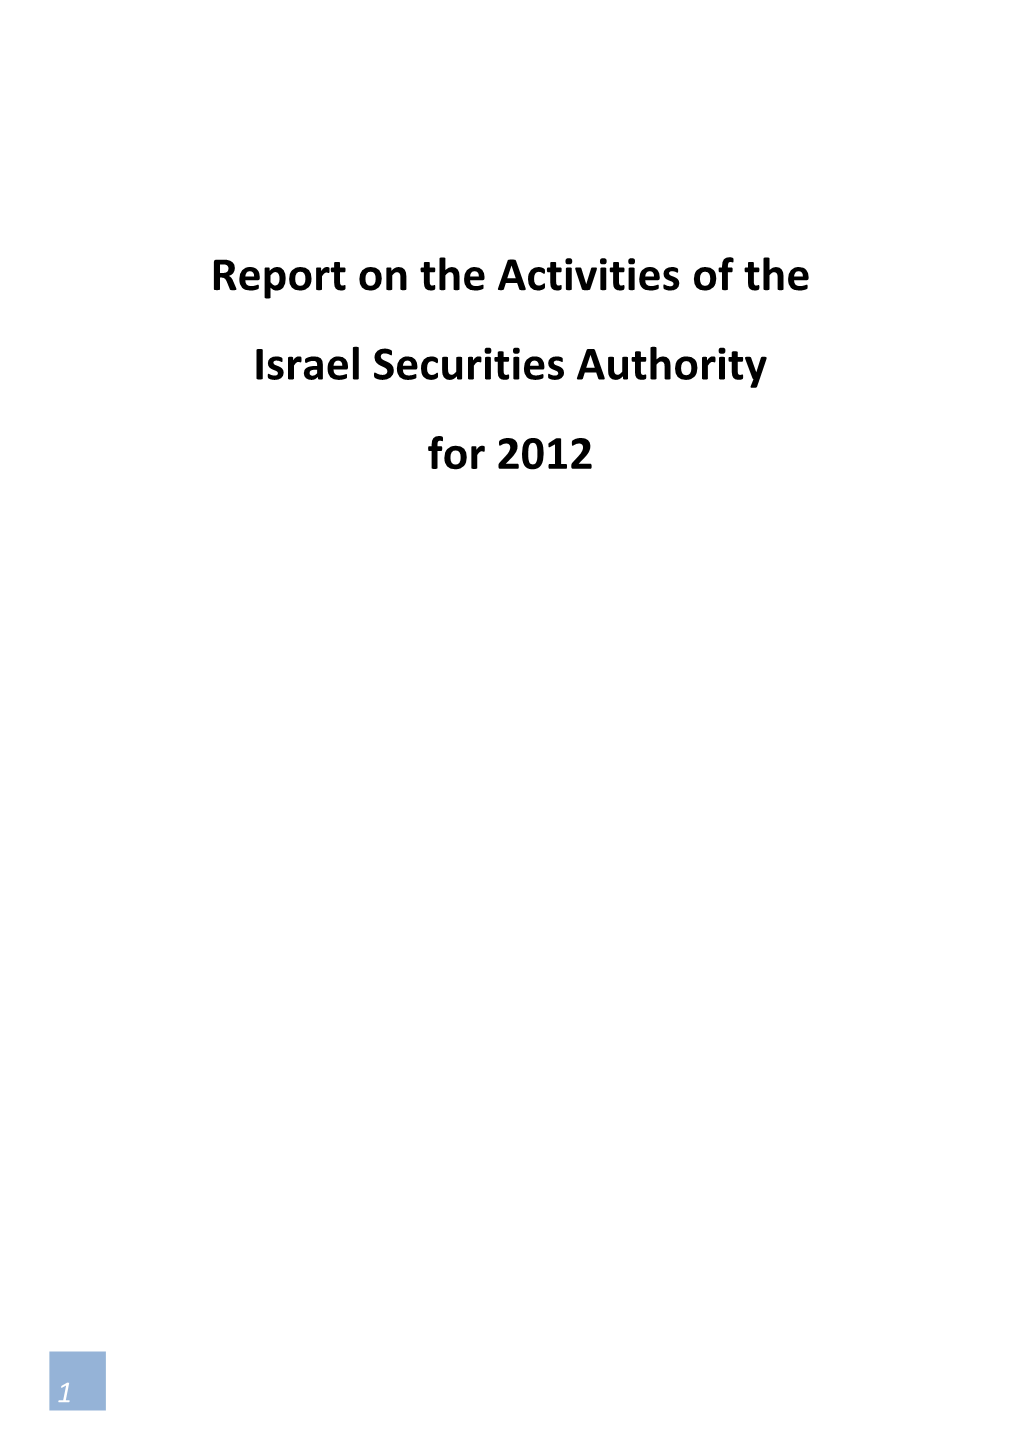 Report on the Activities of the Israel Securities Authority for 2012